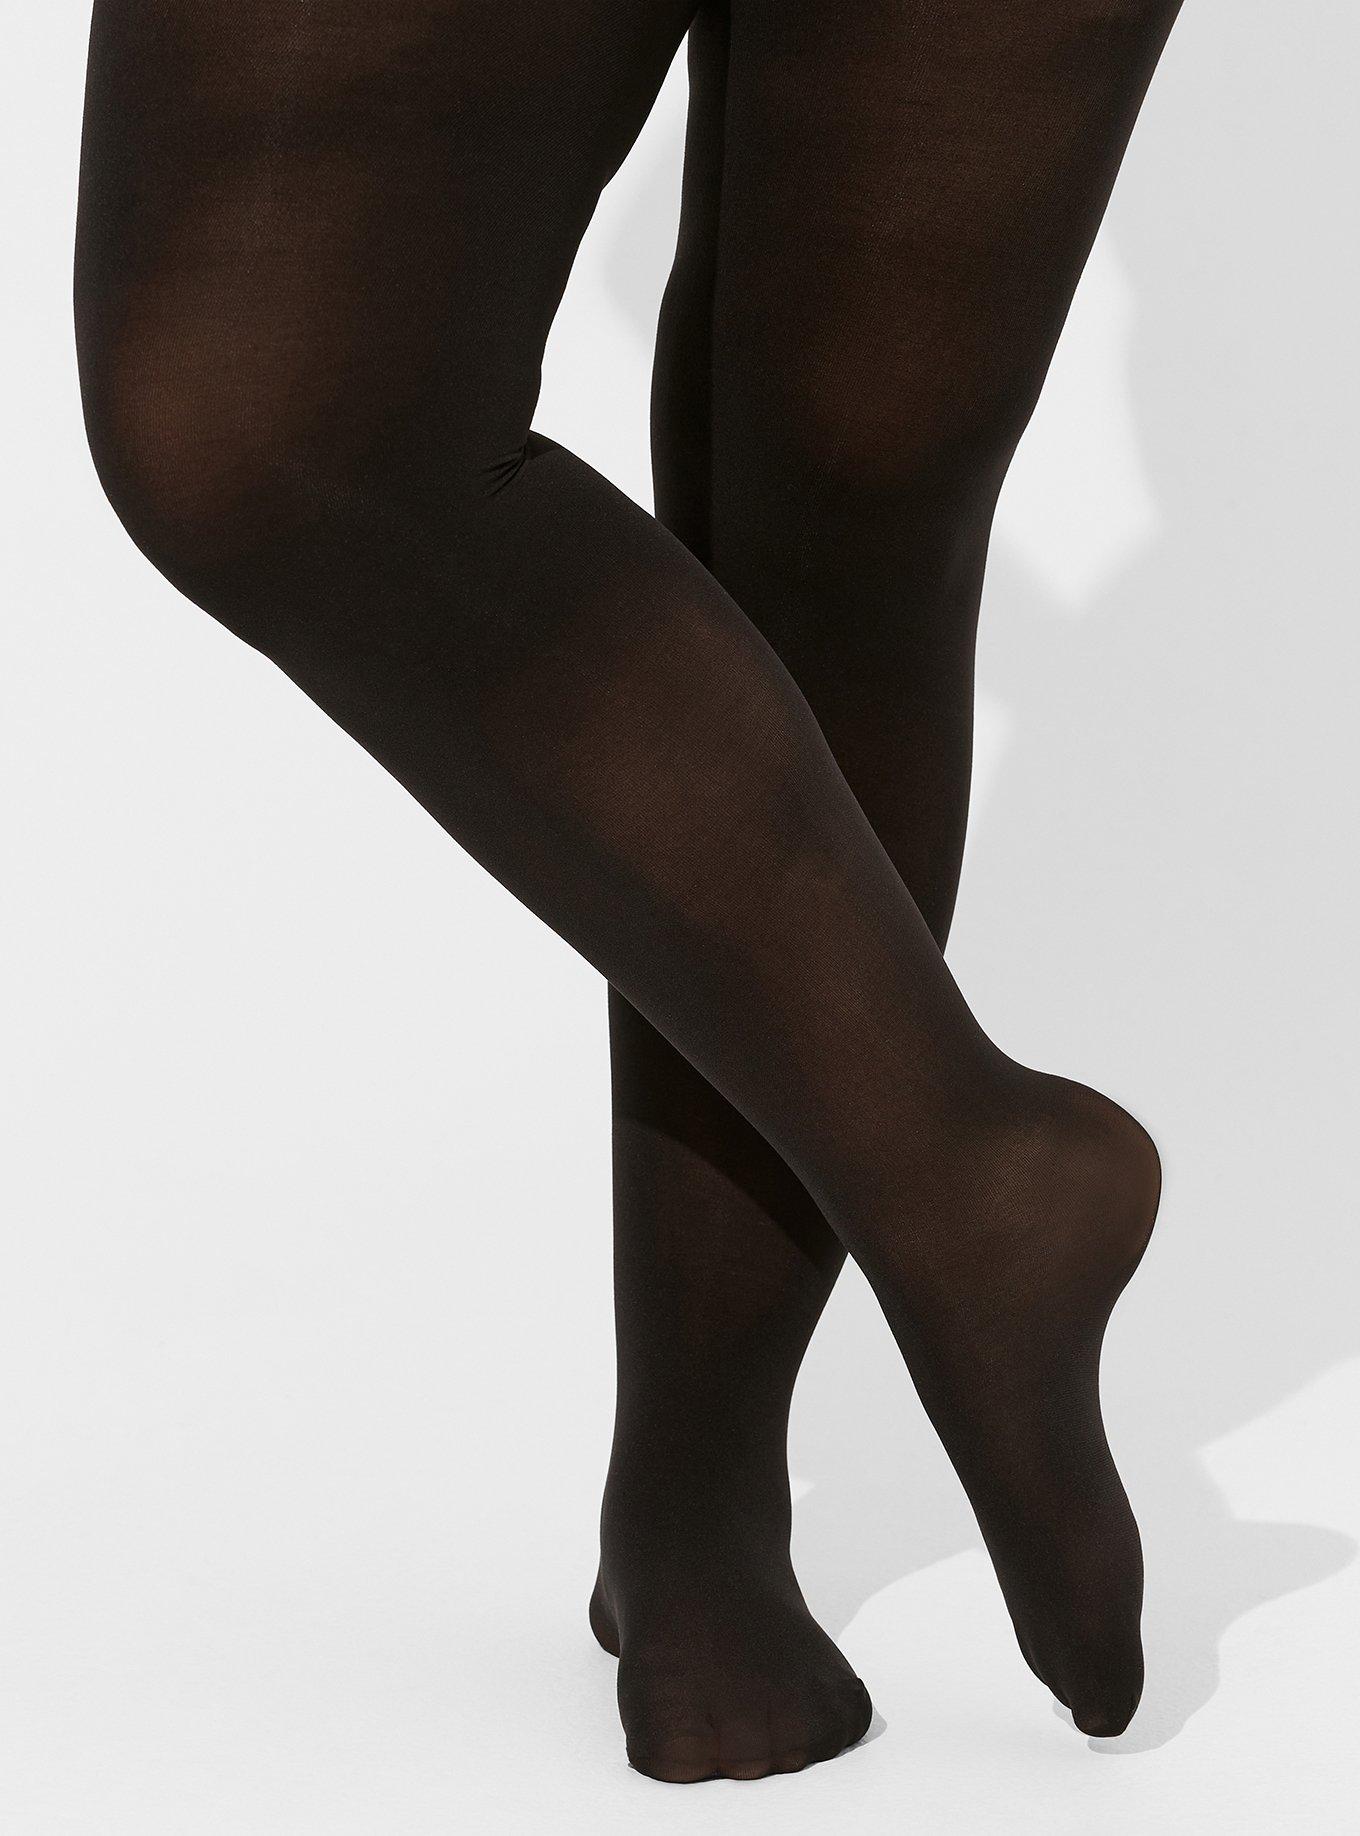 Black tights for plus size women